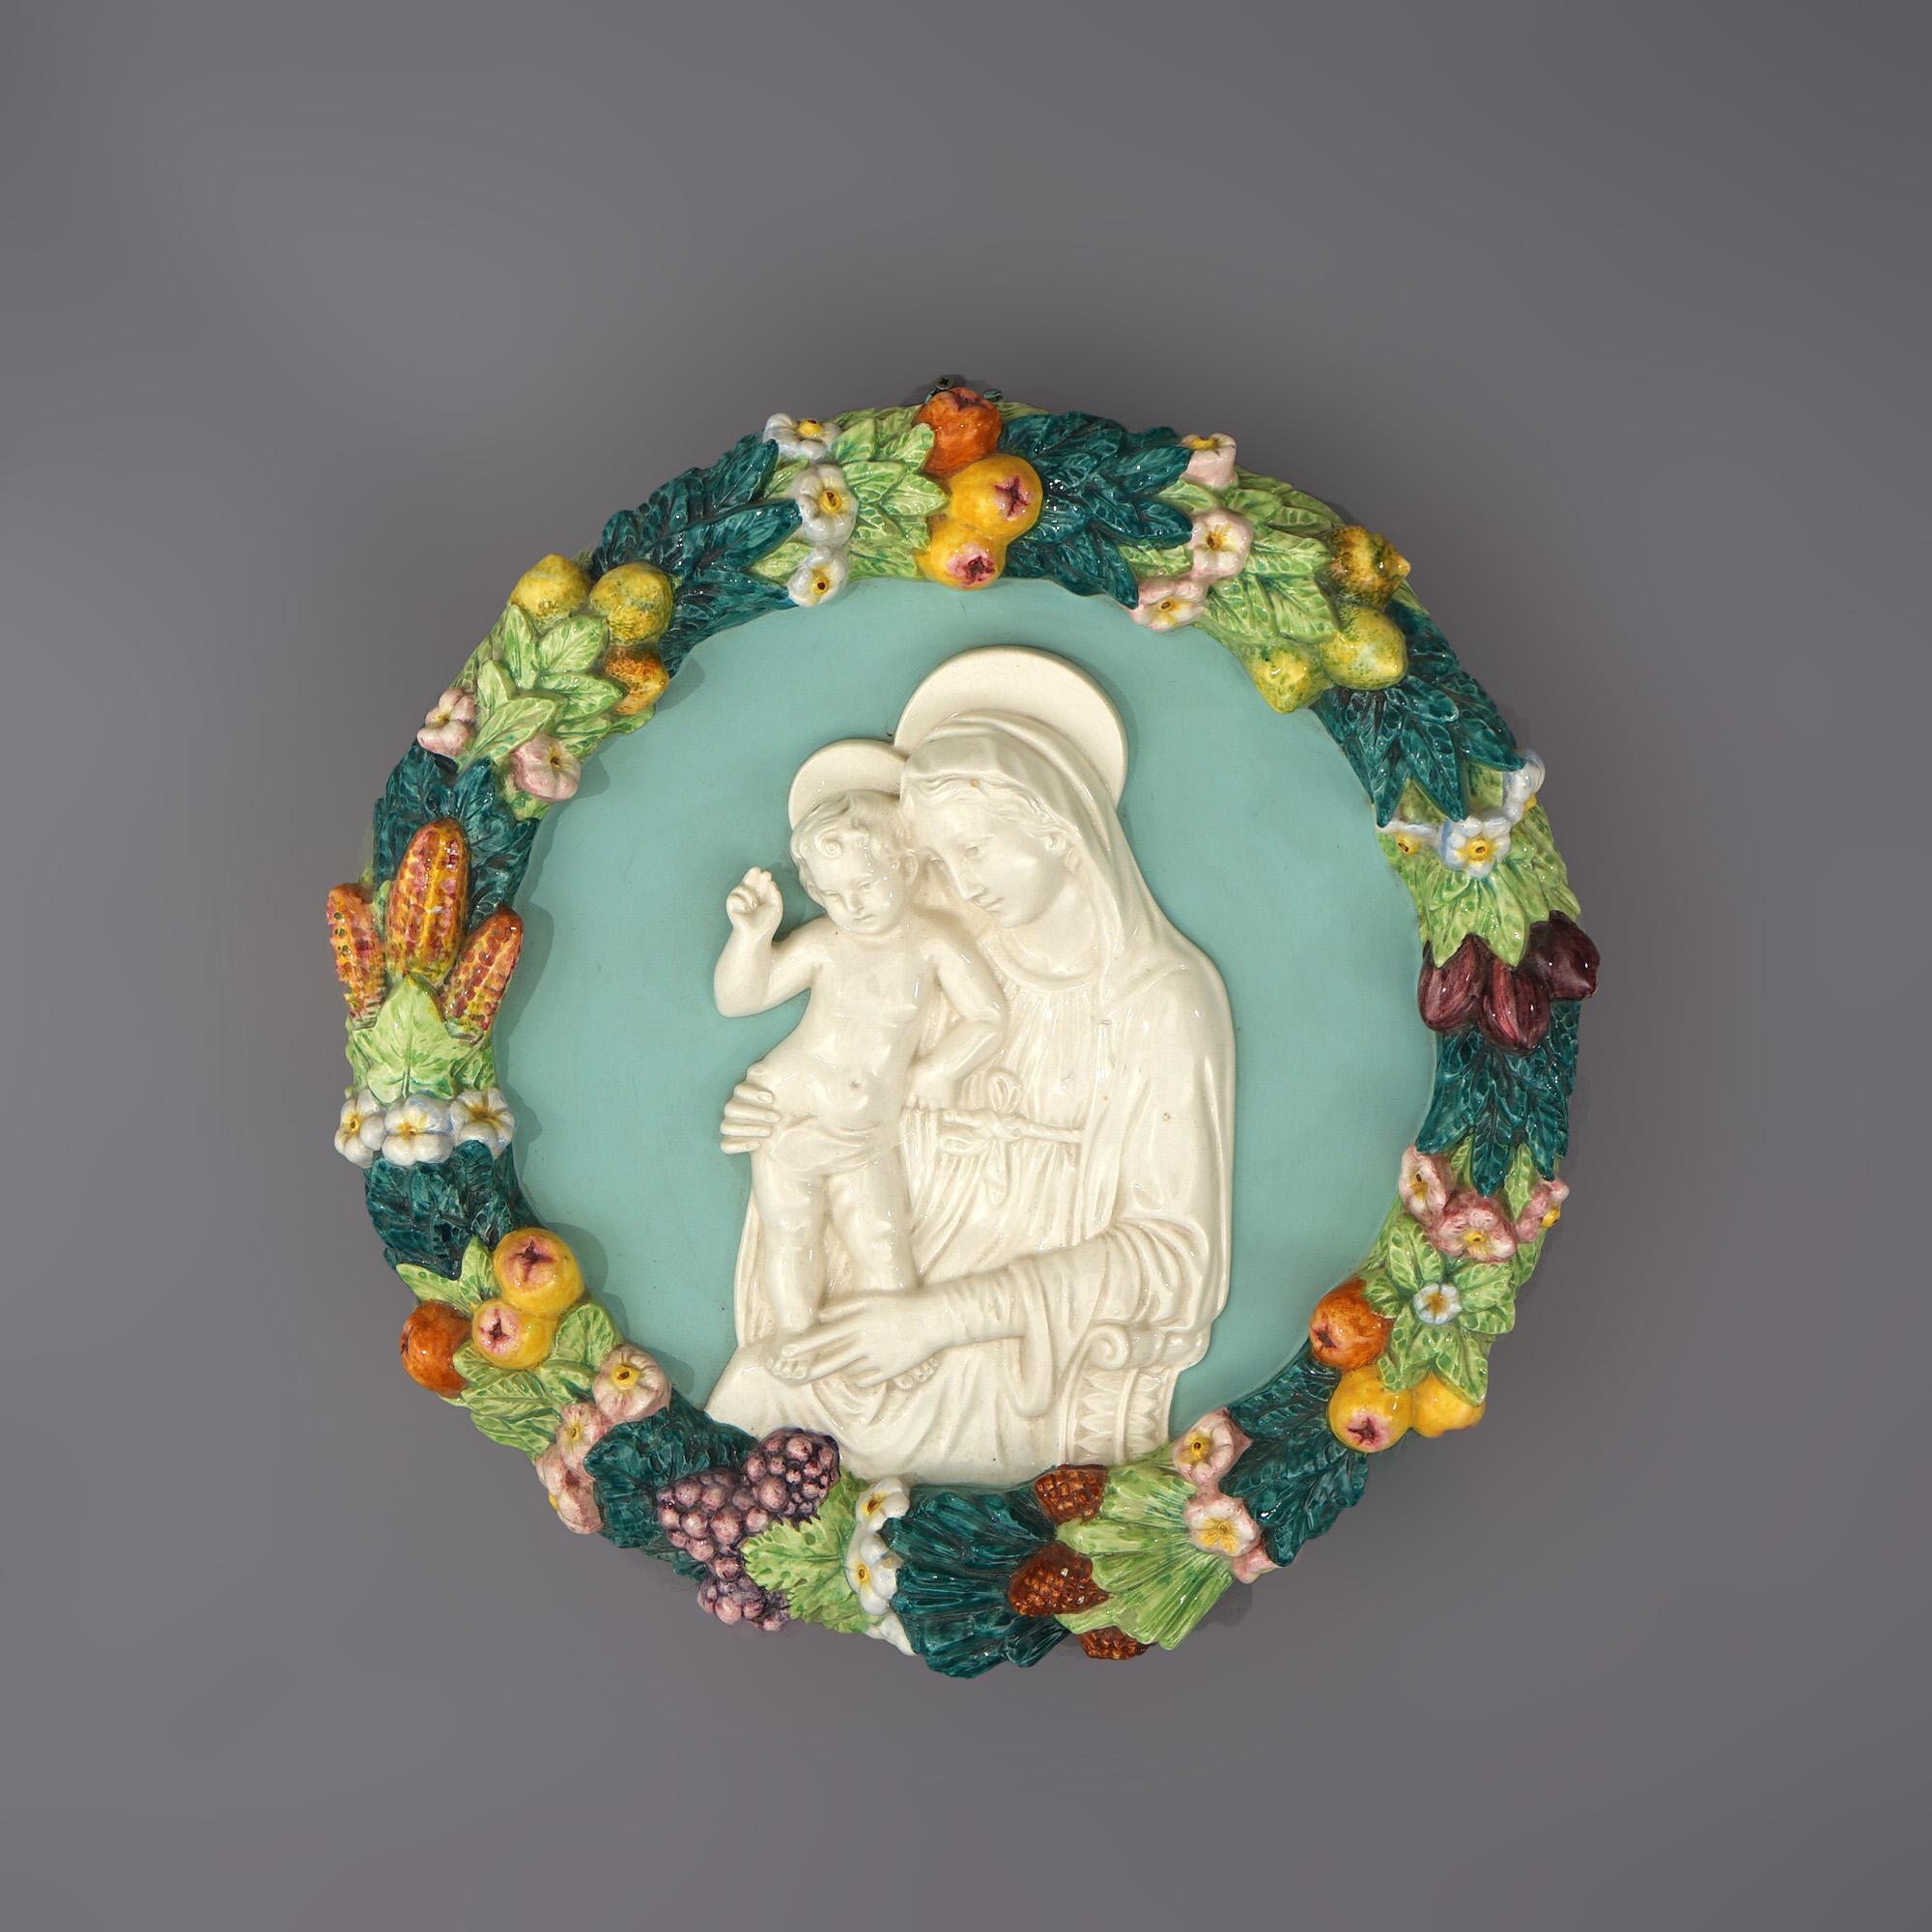 Italian Della Robin Pottery Plaque of Mary & Child with Fruit & Floral Wreath 20th C

Measures - 3.5